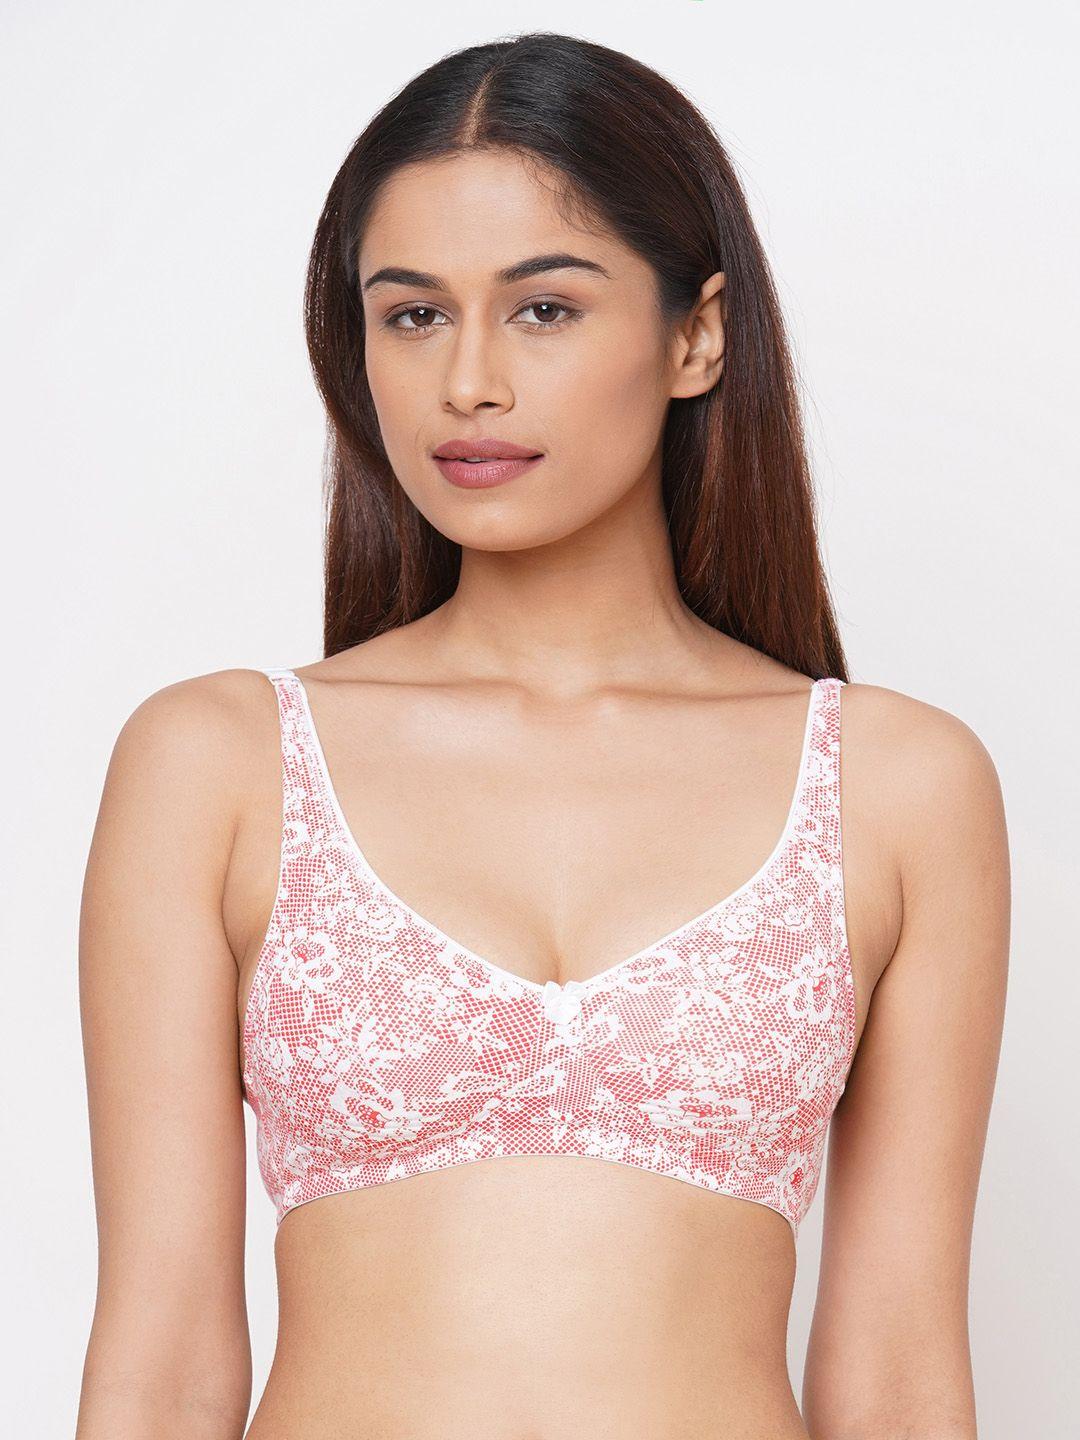 inner sense white & red printed organic cotton antimicrobial sustainable side support bra isb057